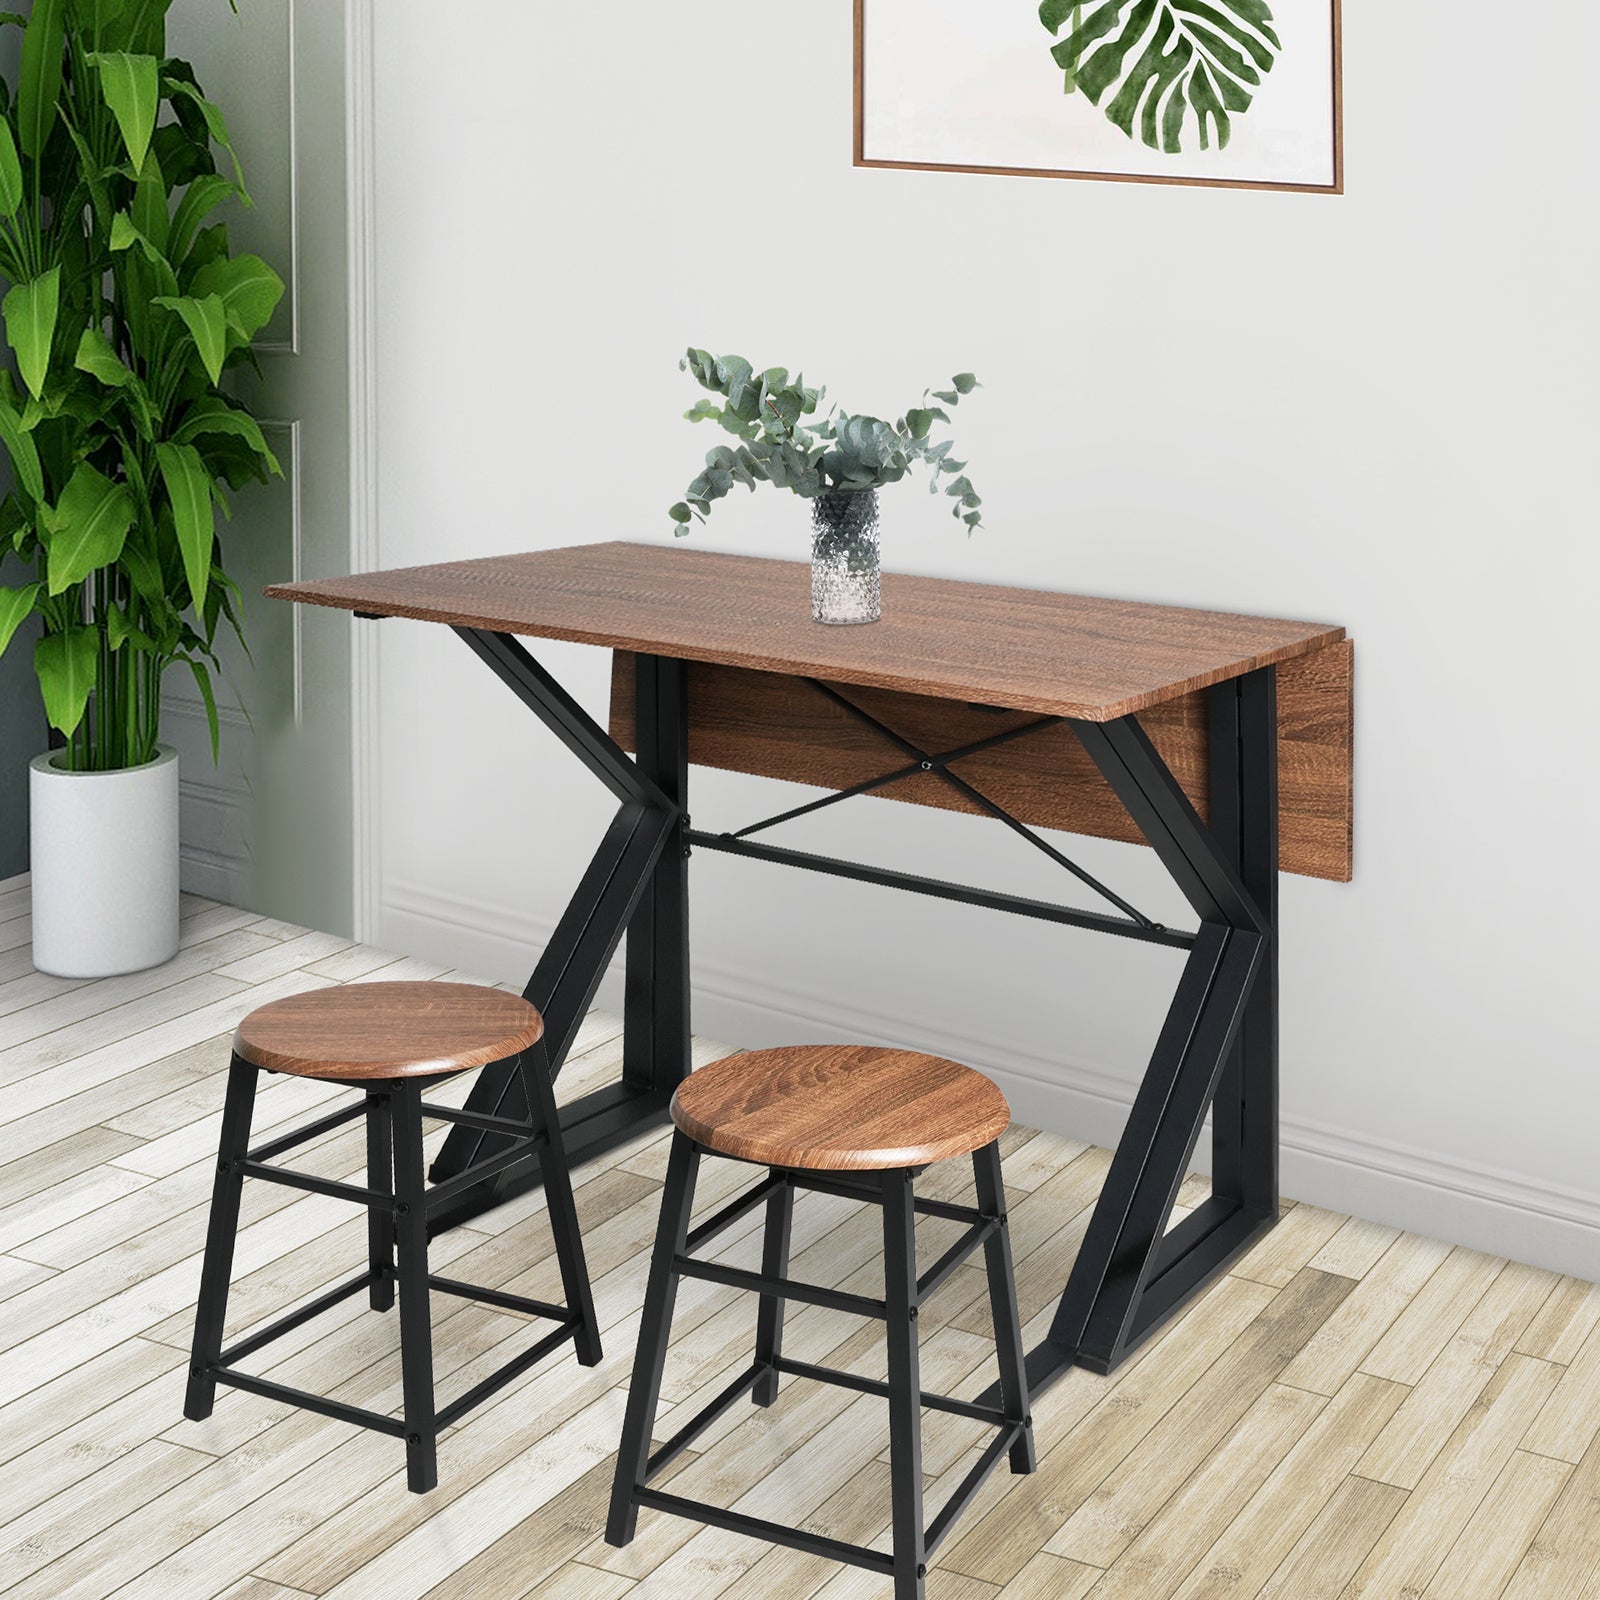 Drop Leaf Dining Table Set for Small Space, 35.4" Drop Leaf Table with 2 Stools